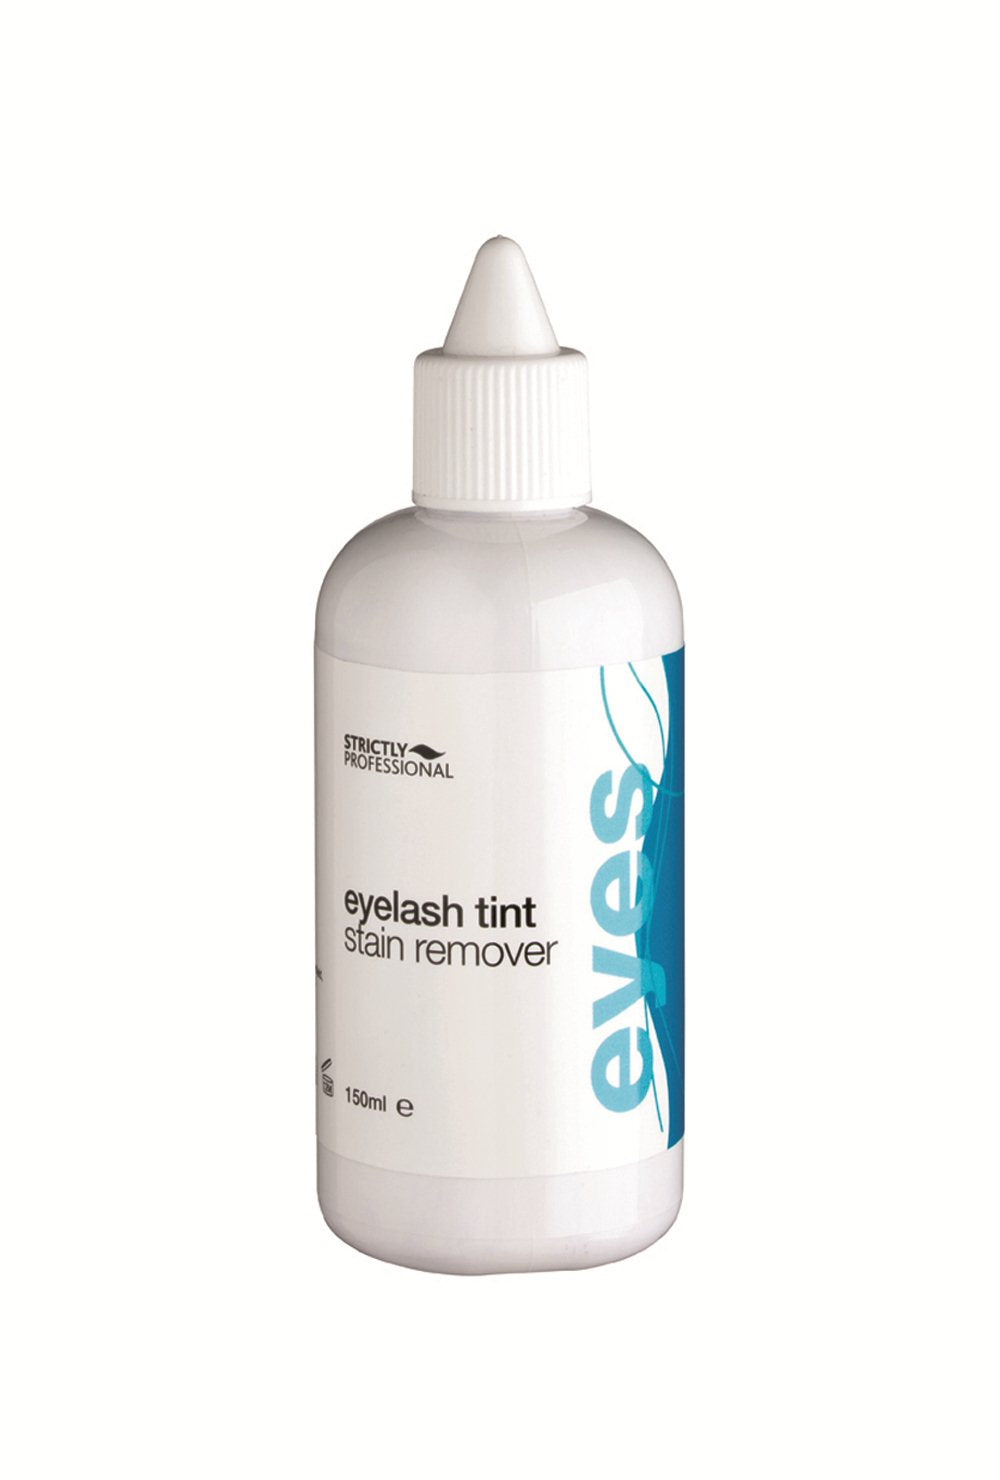 Strictly Professional Eyelash Tint Stain Remover (150ml)